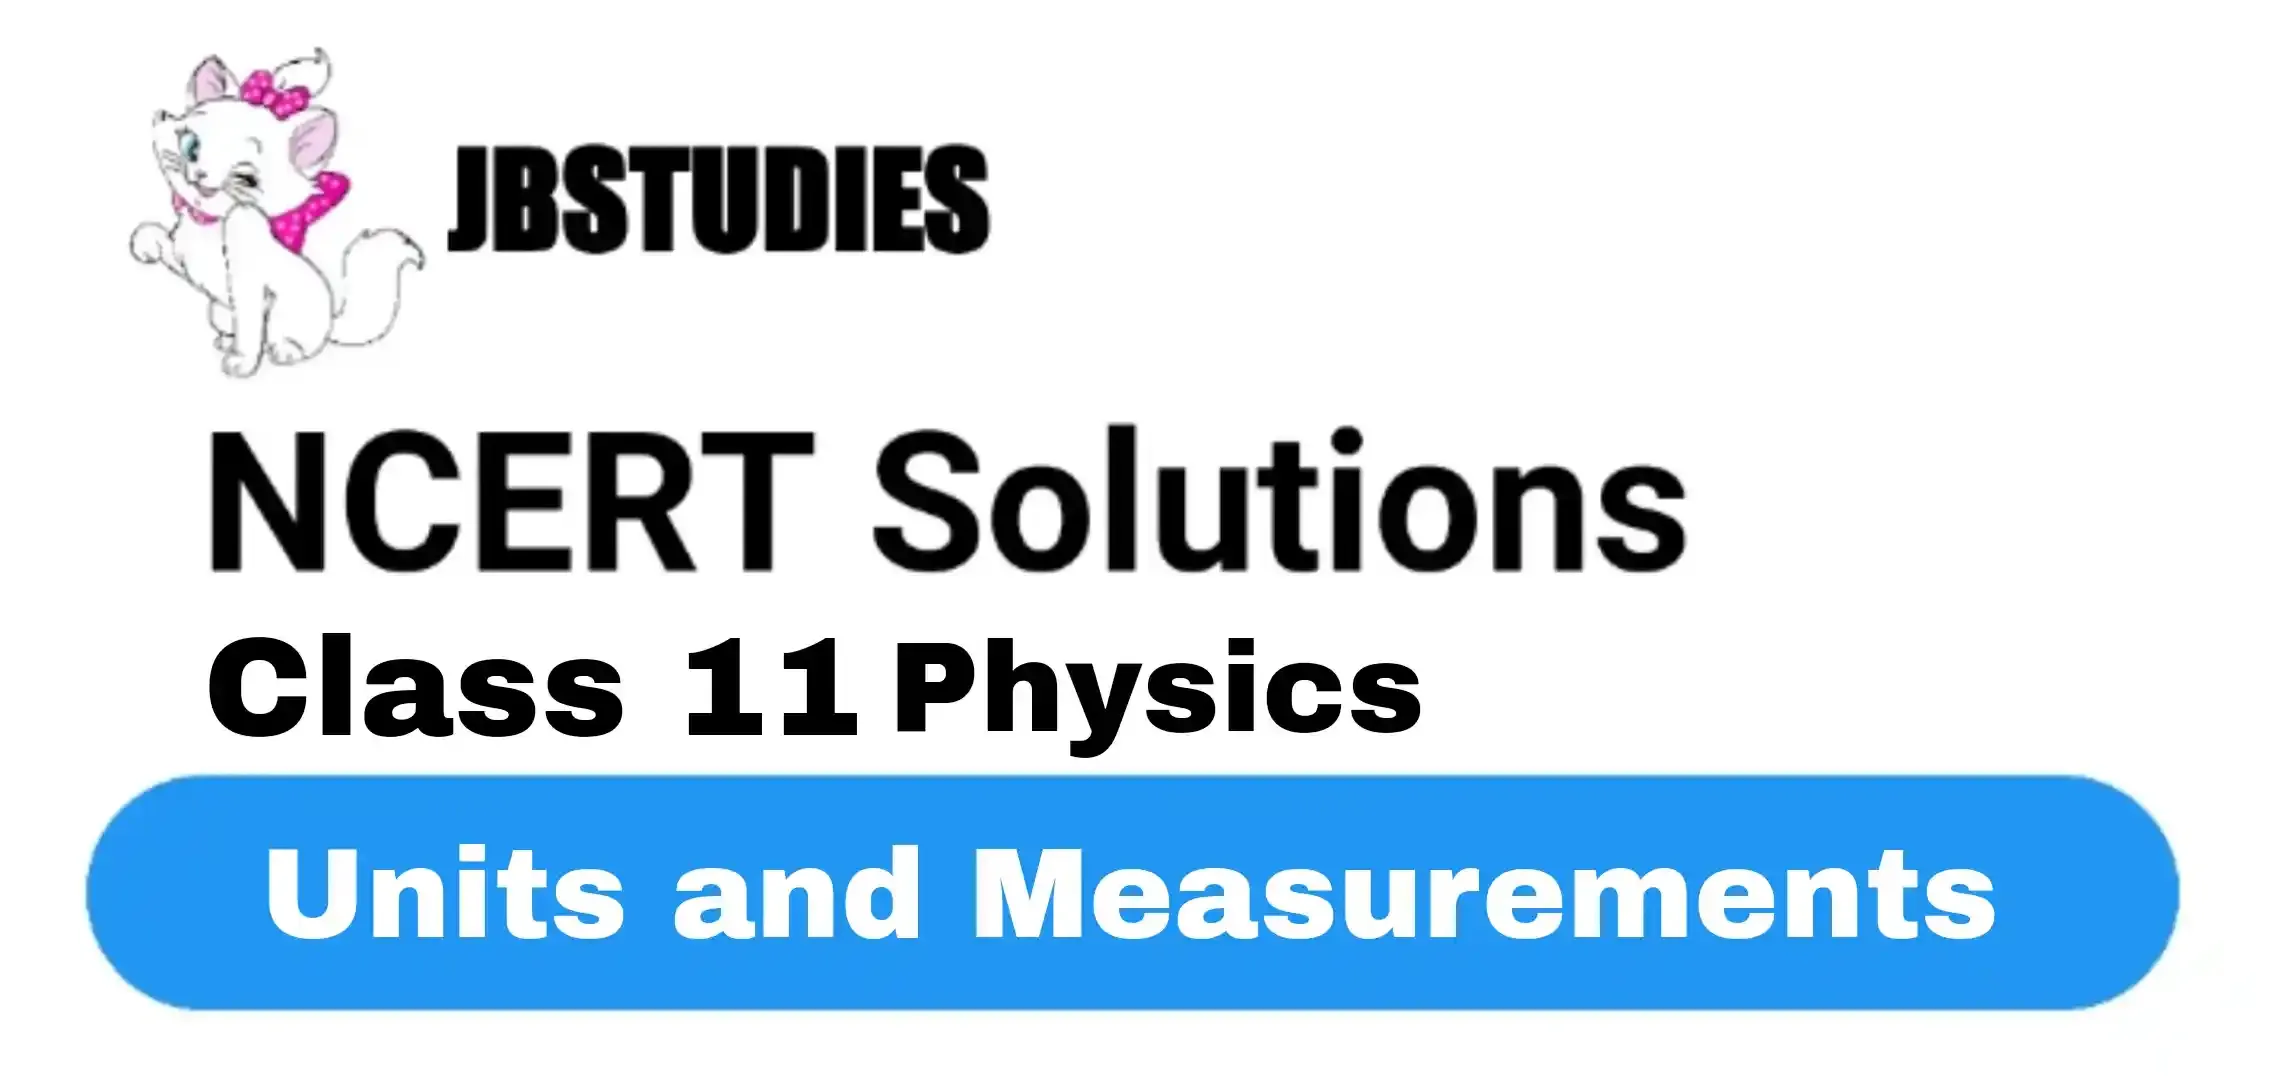 Solutions Class 11 Physics Chapter -2 (Units and Measurements)